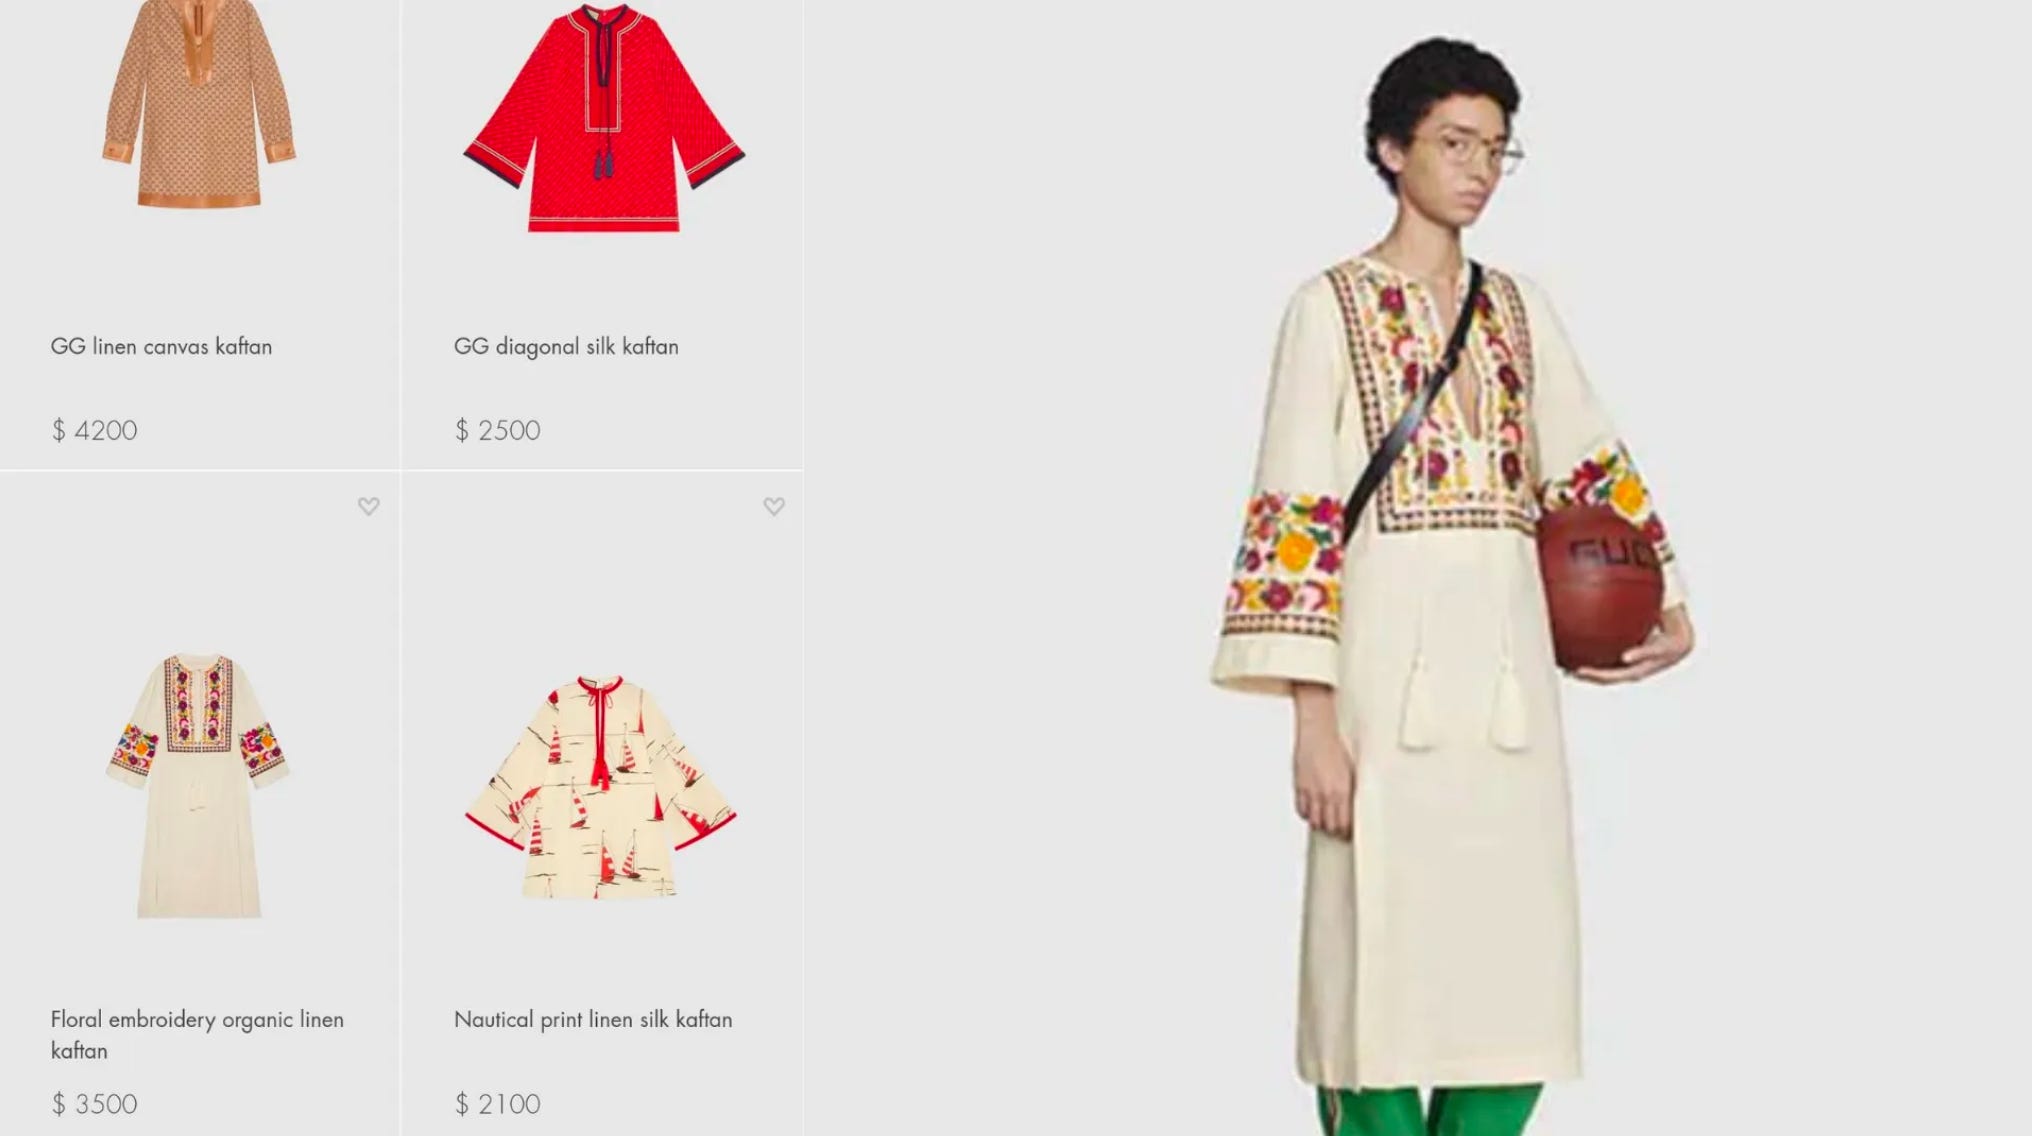 Are Louis Vuitton and Nordstrom appropriating Palestinian culture? - News